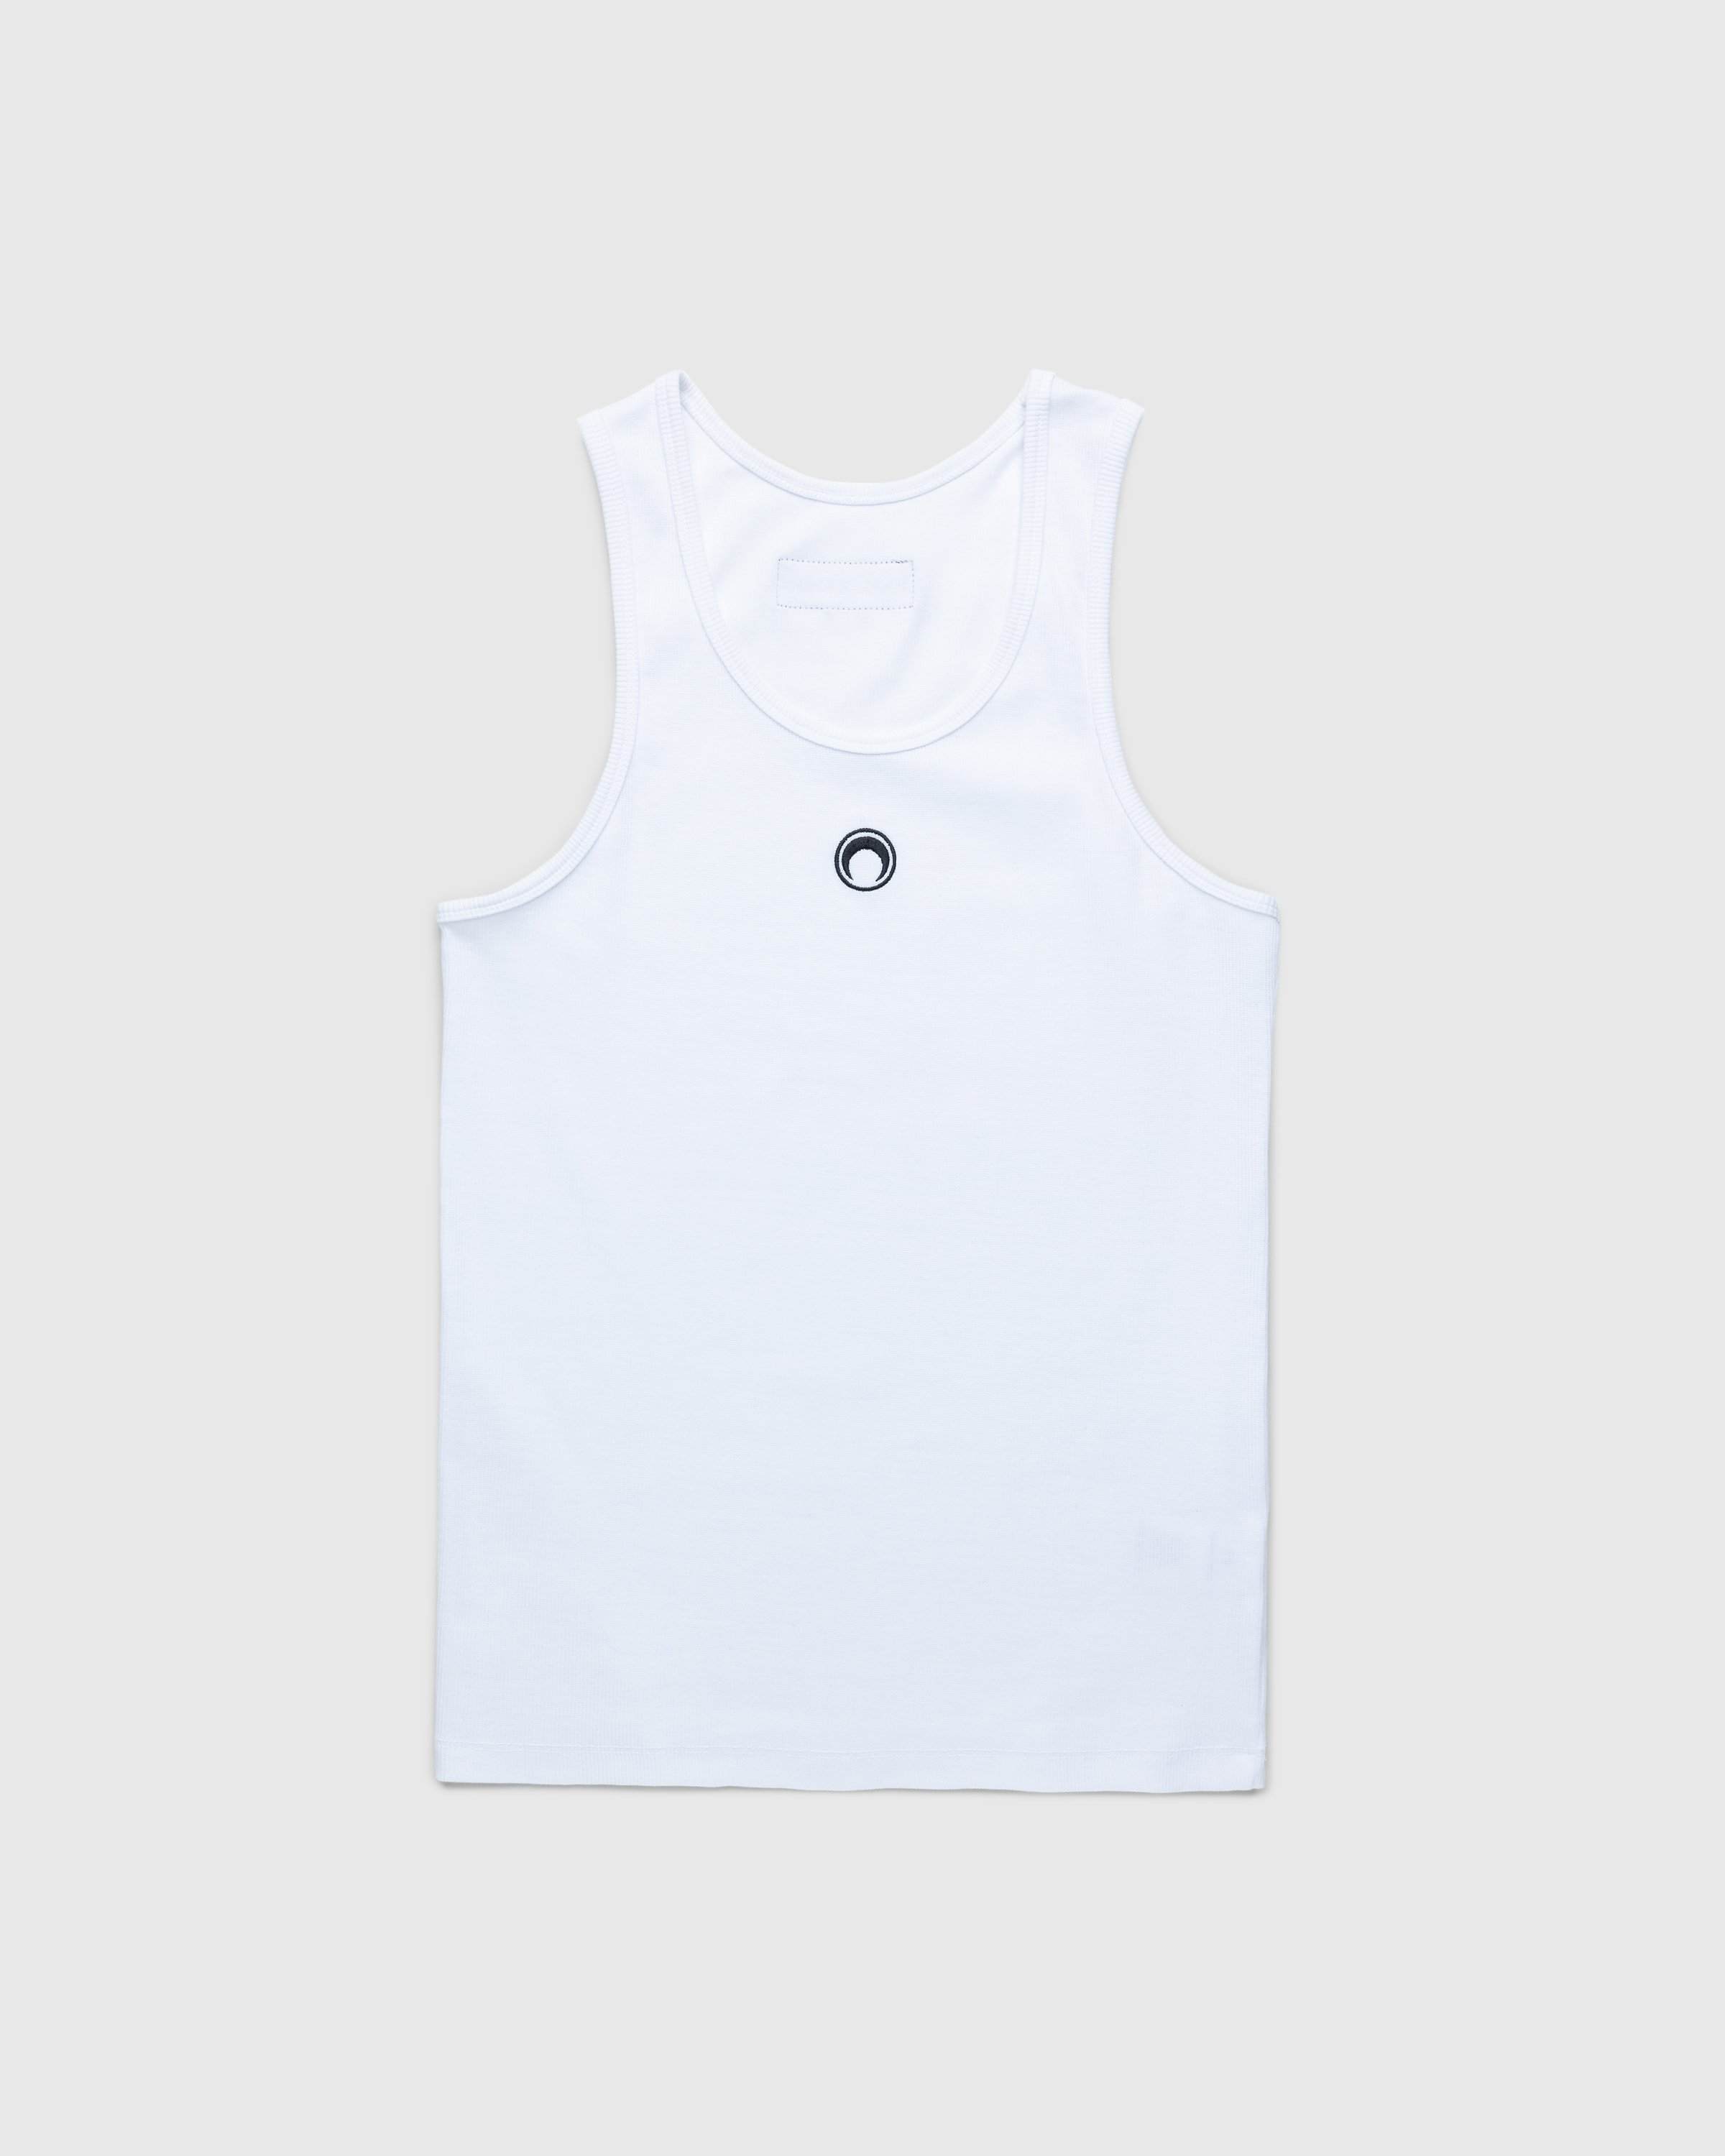 Marine Serre - Organic Cotton Fitted Tank Top White - Clothing - White - Image 1